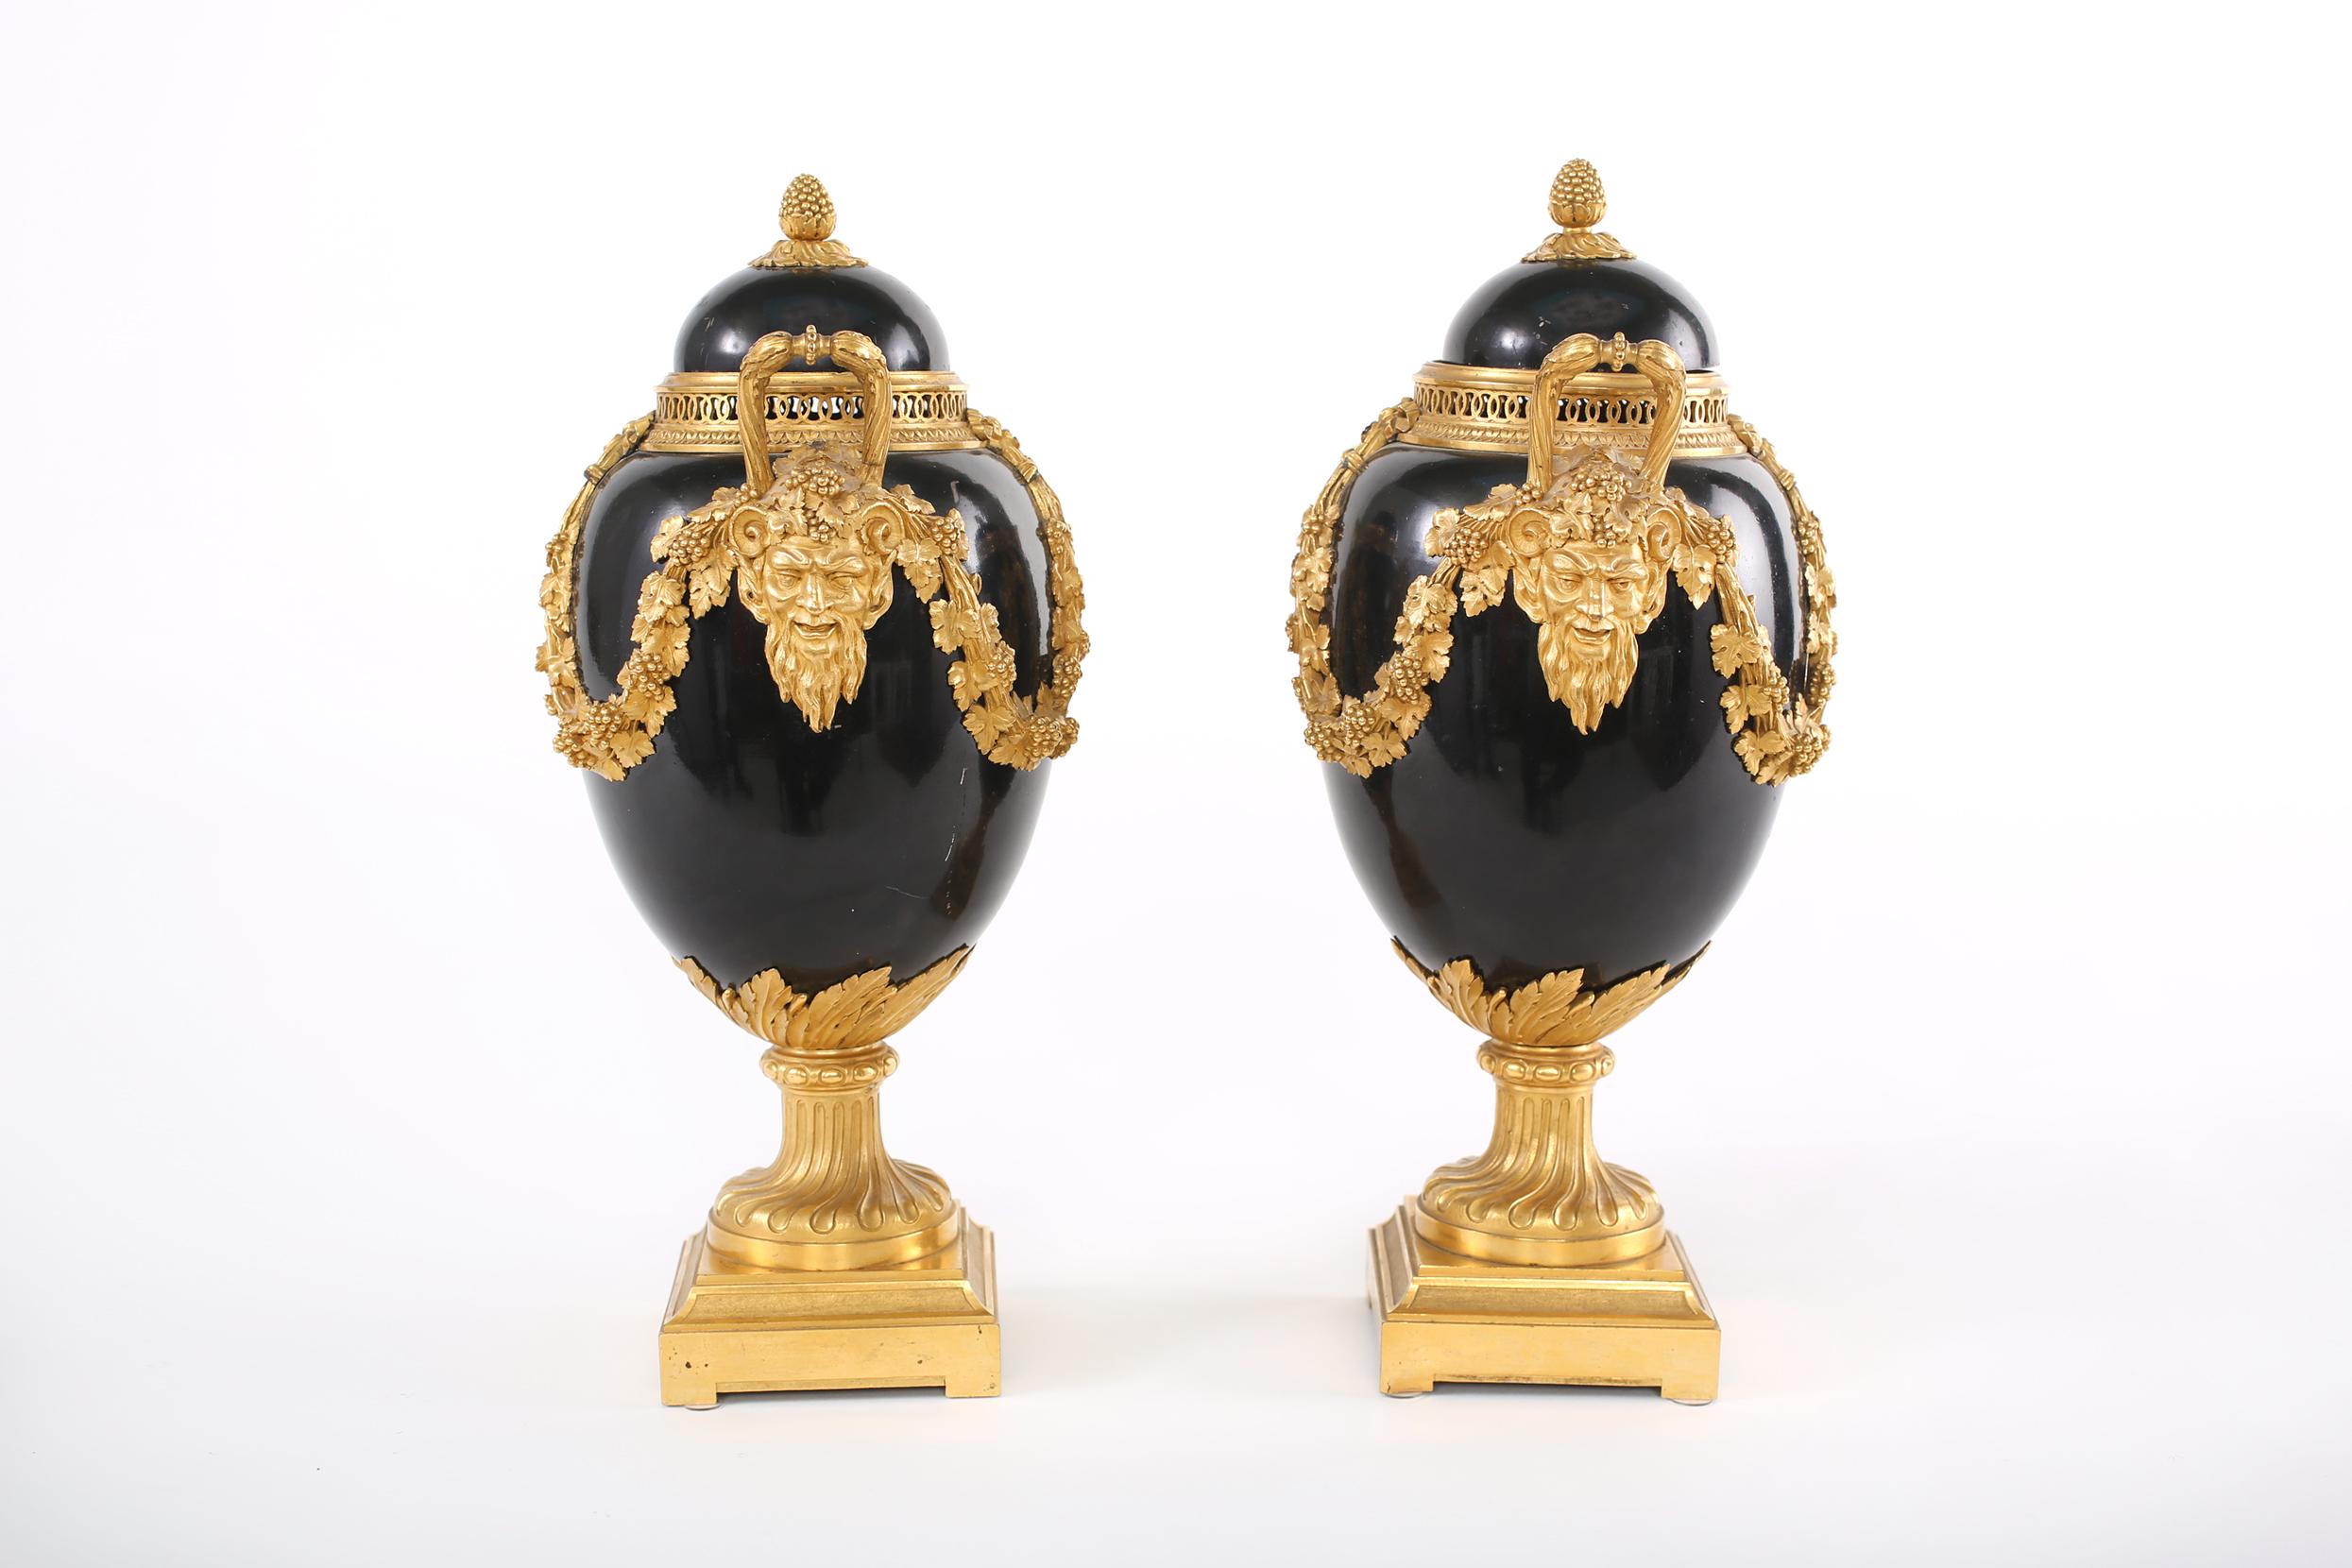 Pair continental gilt bronze mounted covered urns with side handles & exterior design details. Each urn is in good vintage condition. Minor wear consistent with age / use. Each one stands about 12-1/2 inches x 6-1/2 inches x 5- 1/4 inches.
 